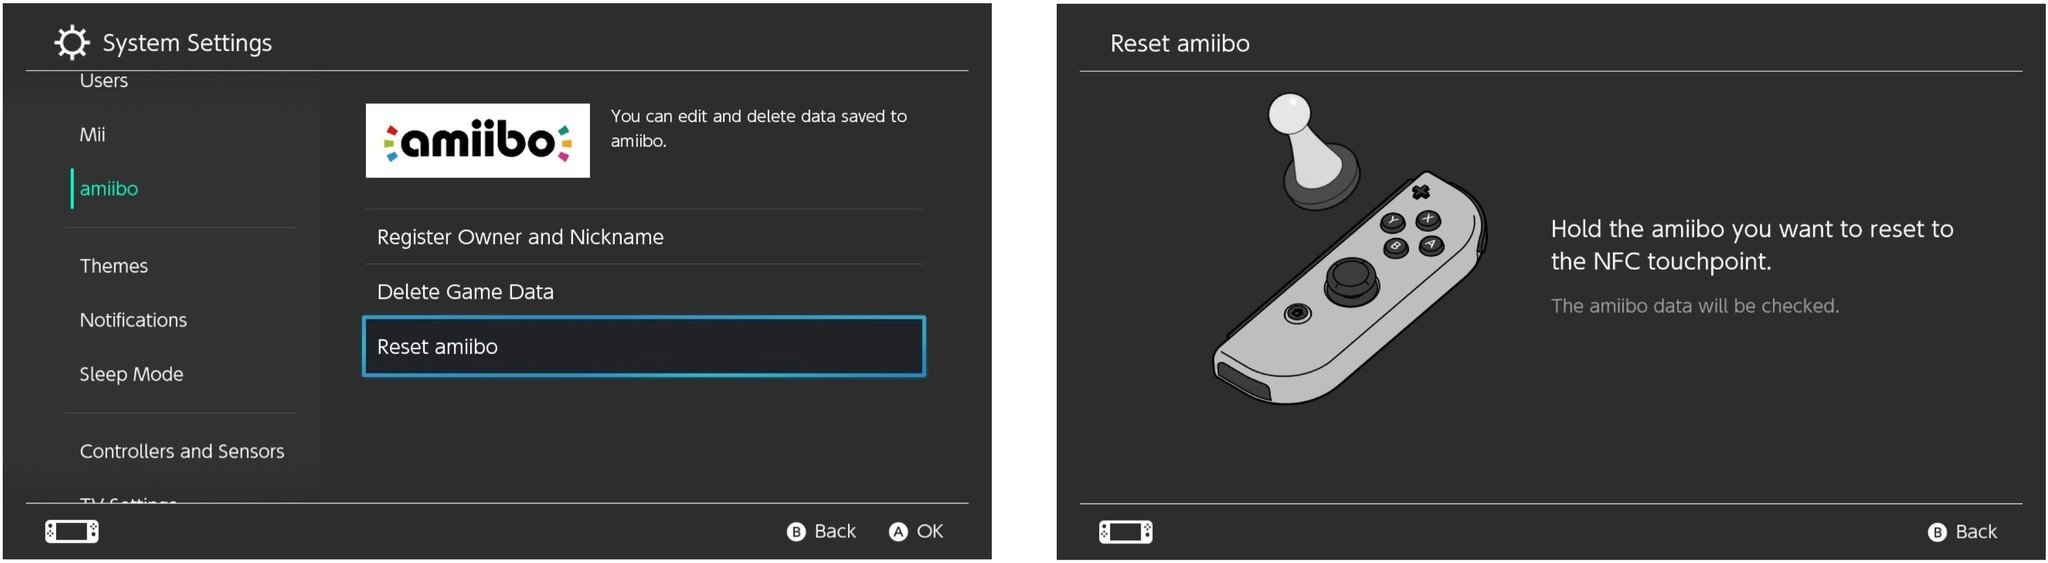 Select Reset amiibo, then place amiibo on the NFC reader